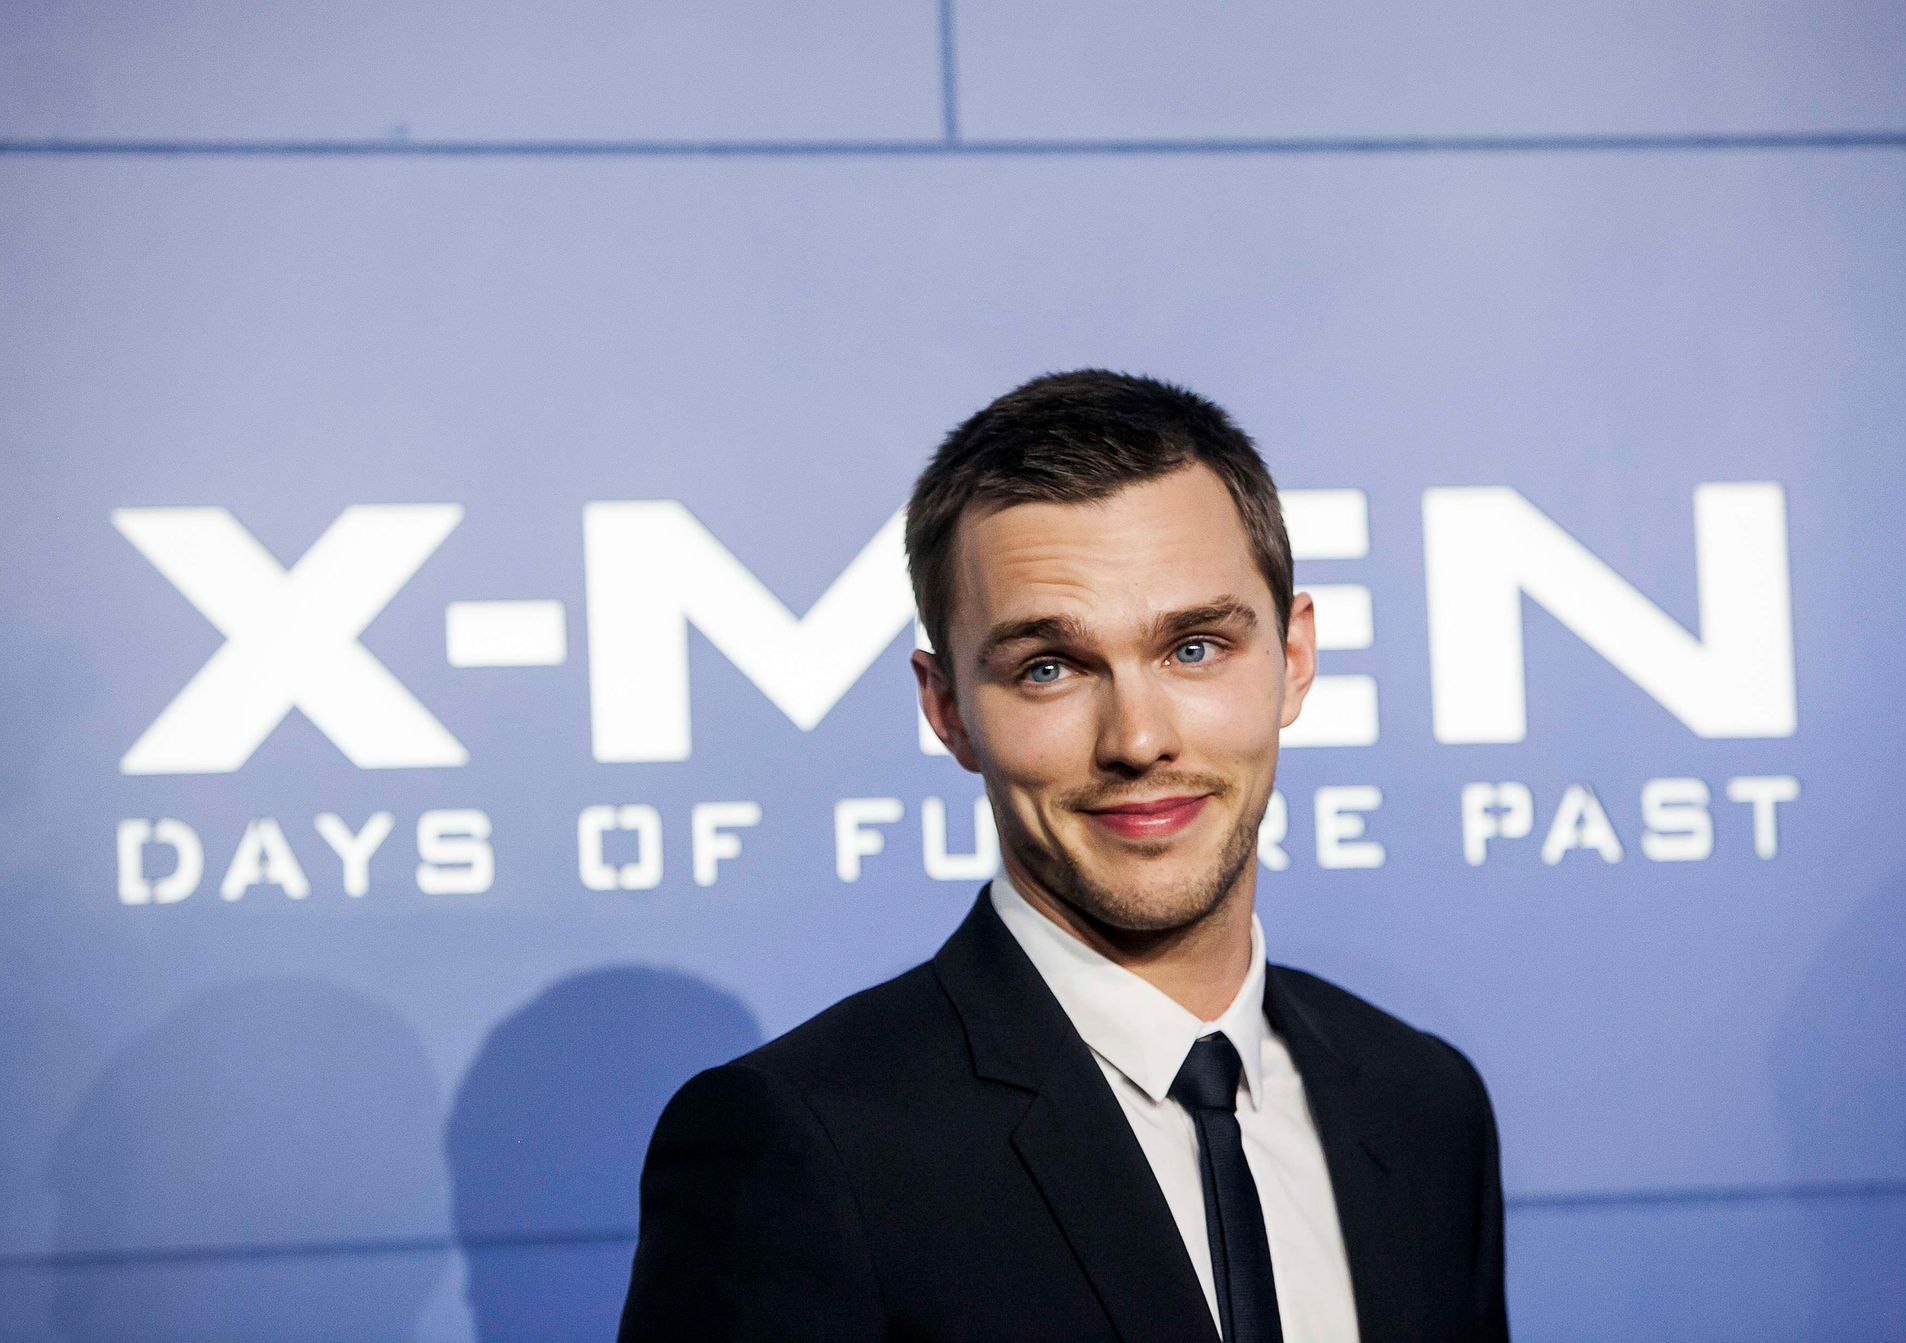 Actor Nicholas Hoult attends the &quot;X-Men: Days of Future Past&quot; world movie premiere in New York